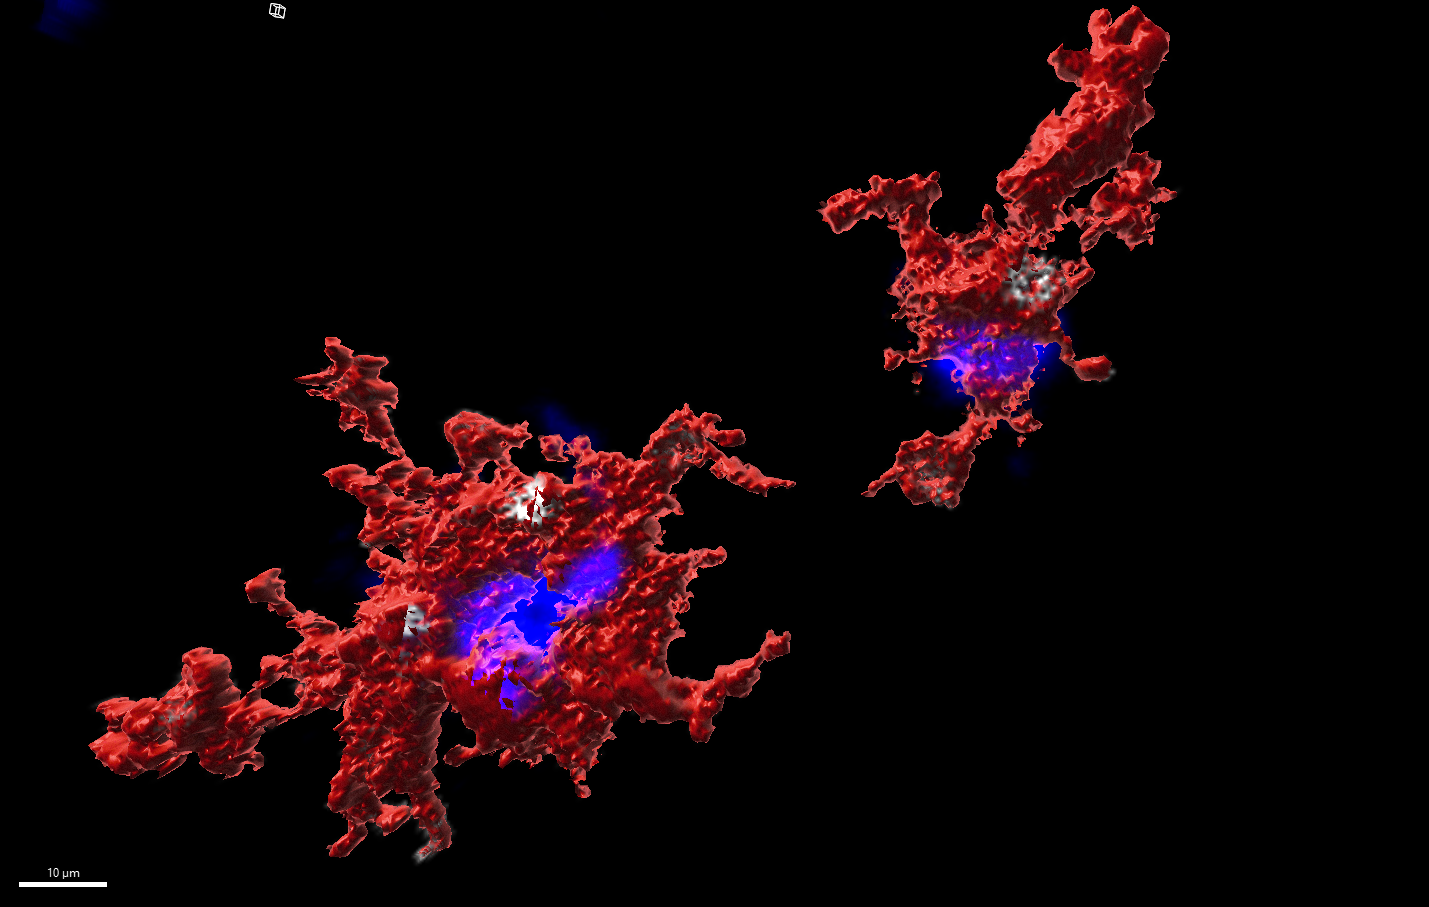 3D image of a protein molecule